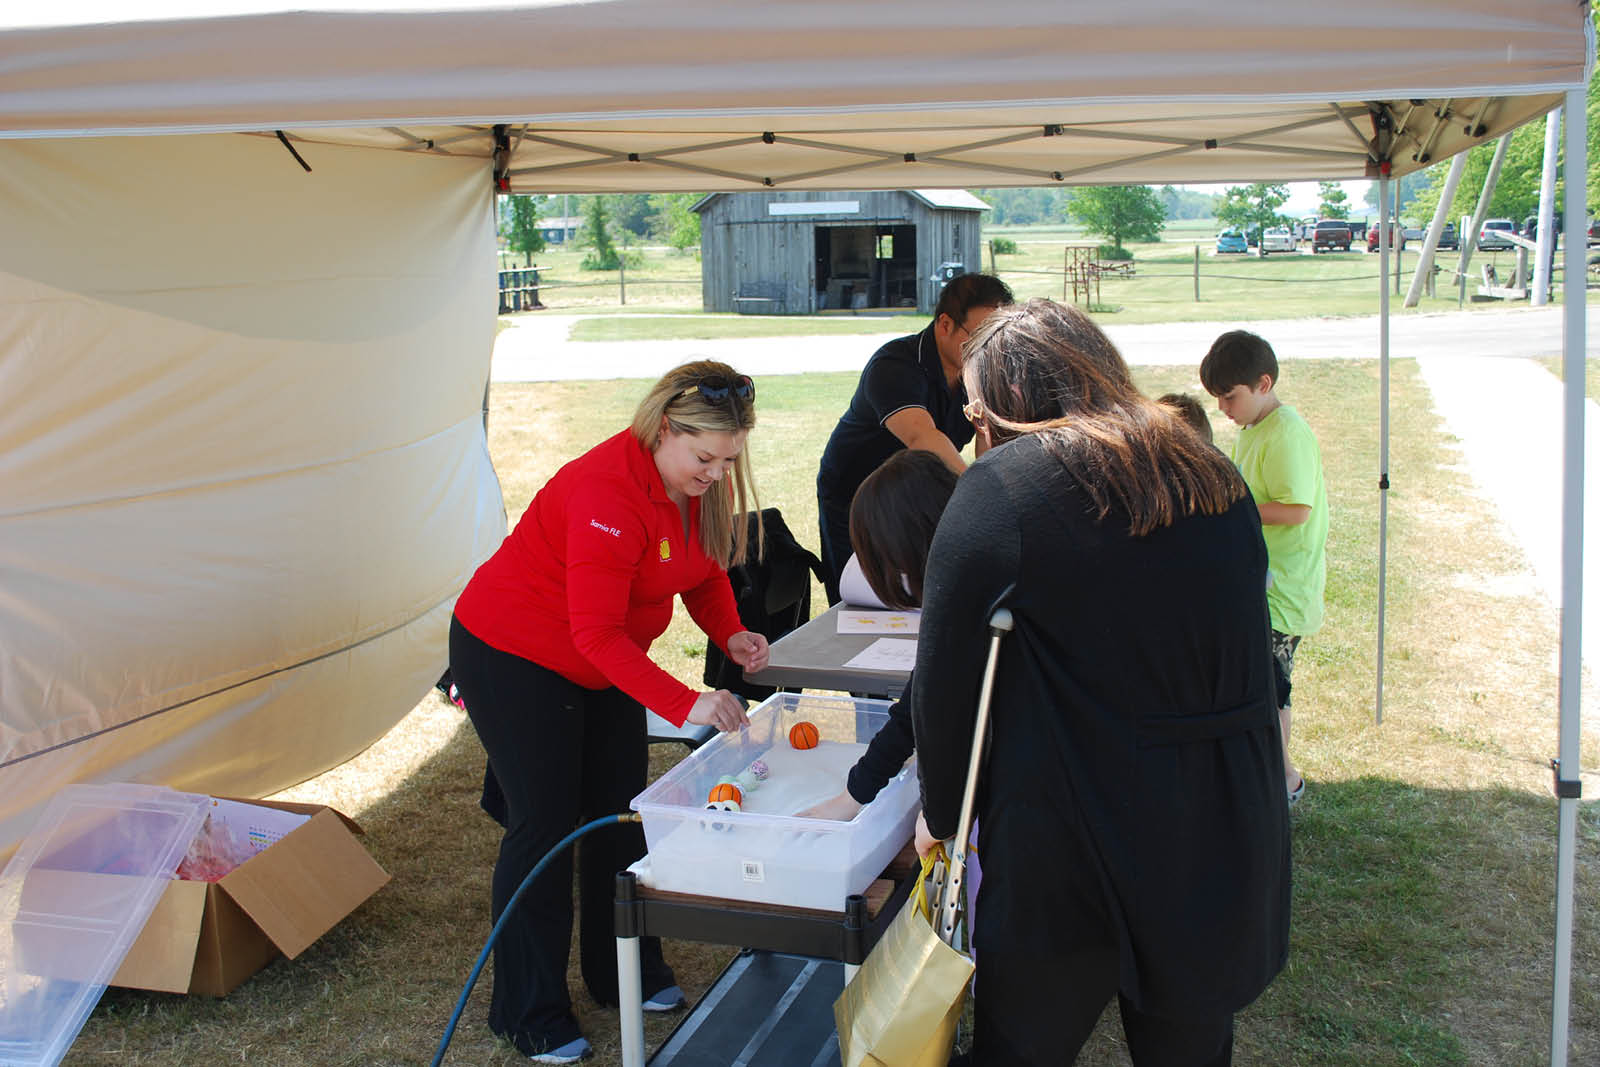 Shell experts operate a fluidized bed demonstration in a plastic tub outside under a tent at the Oil Museum's Shell PA Day in 2023.